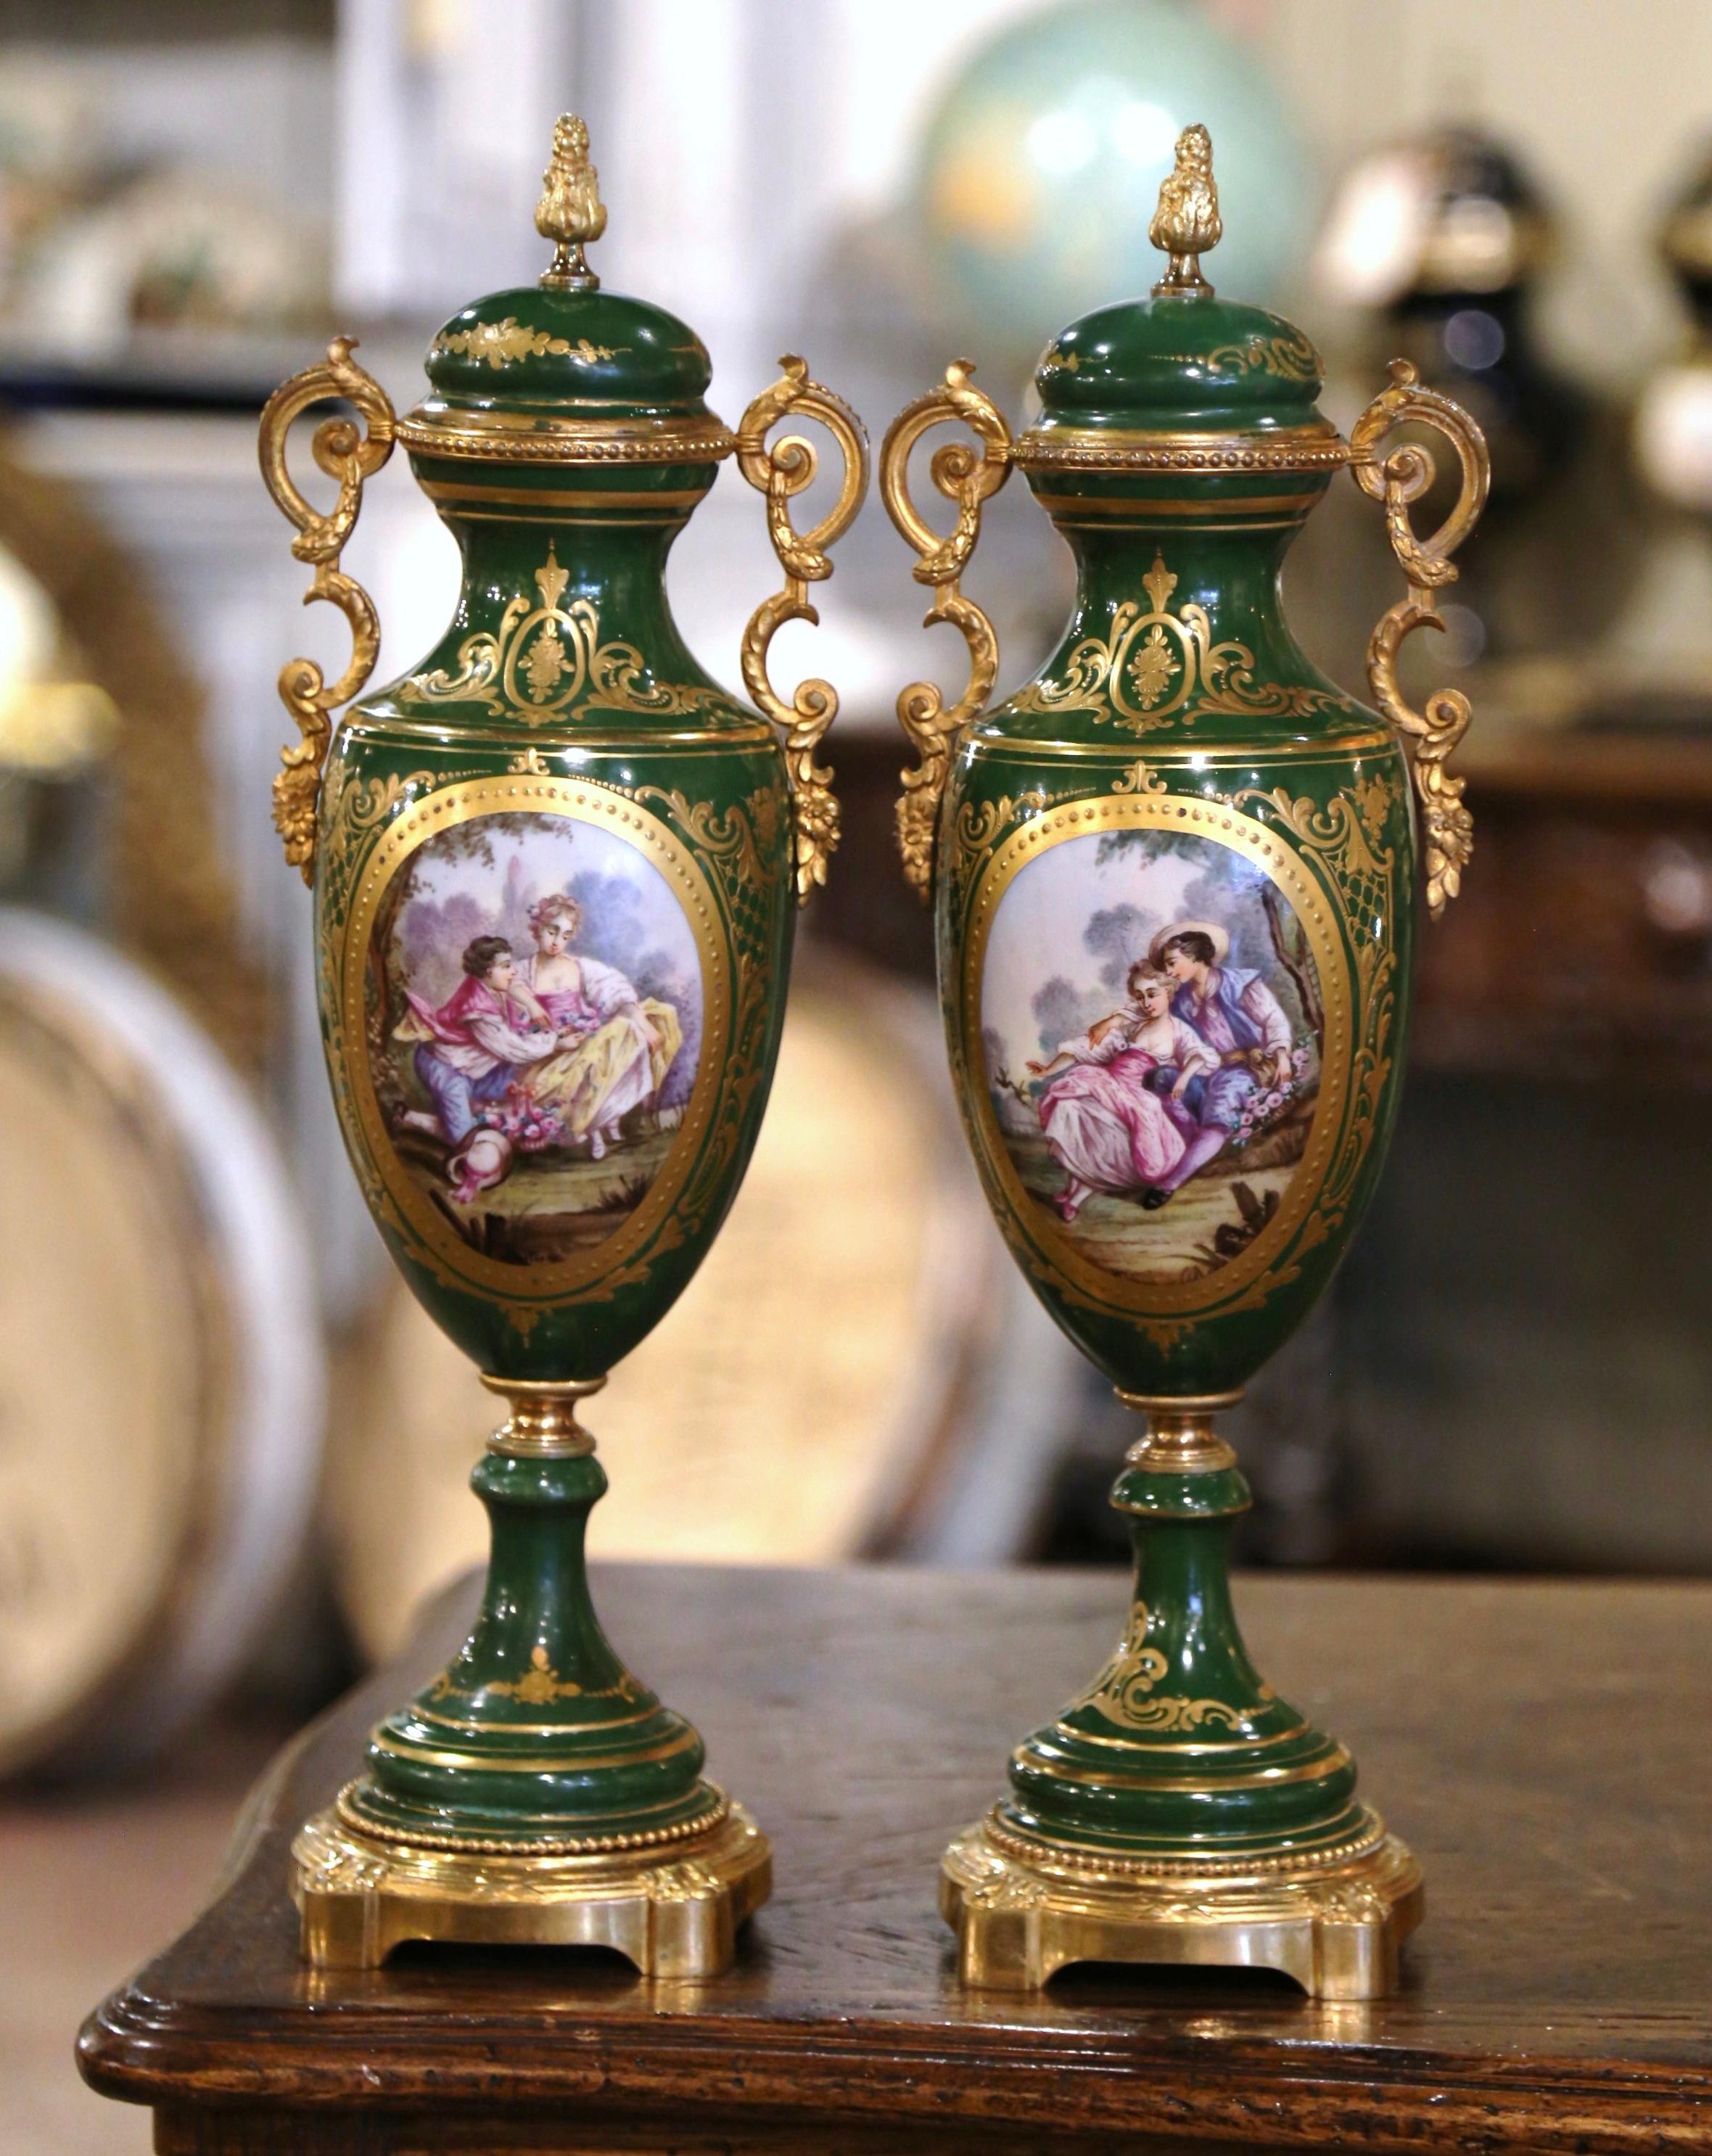 Pair of 19th Century French Sevres Gilt Metal and Painted Porcelain Covered Urns For Sale 2